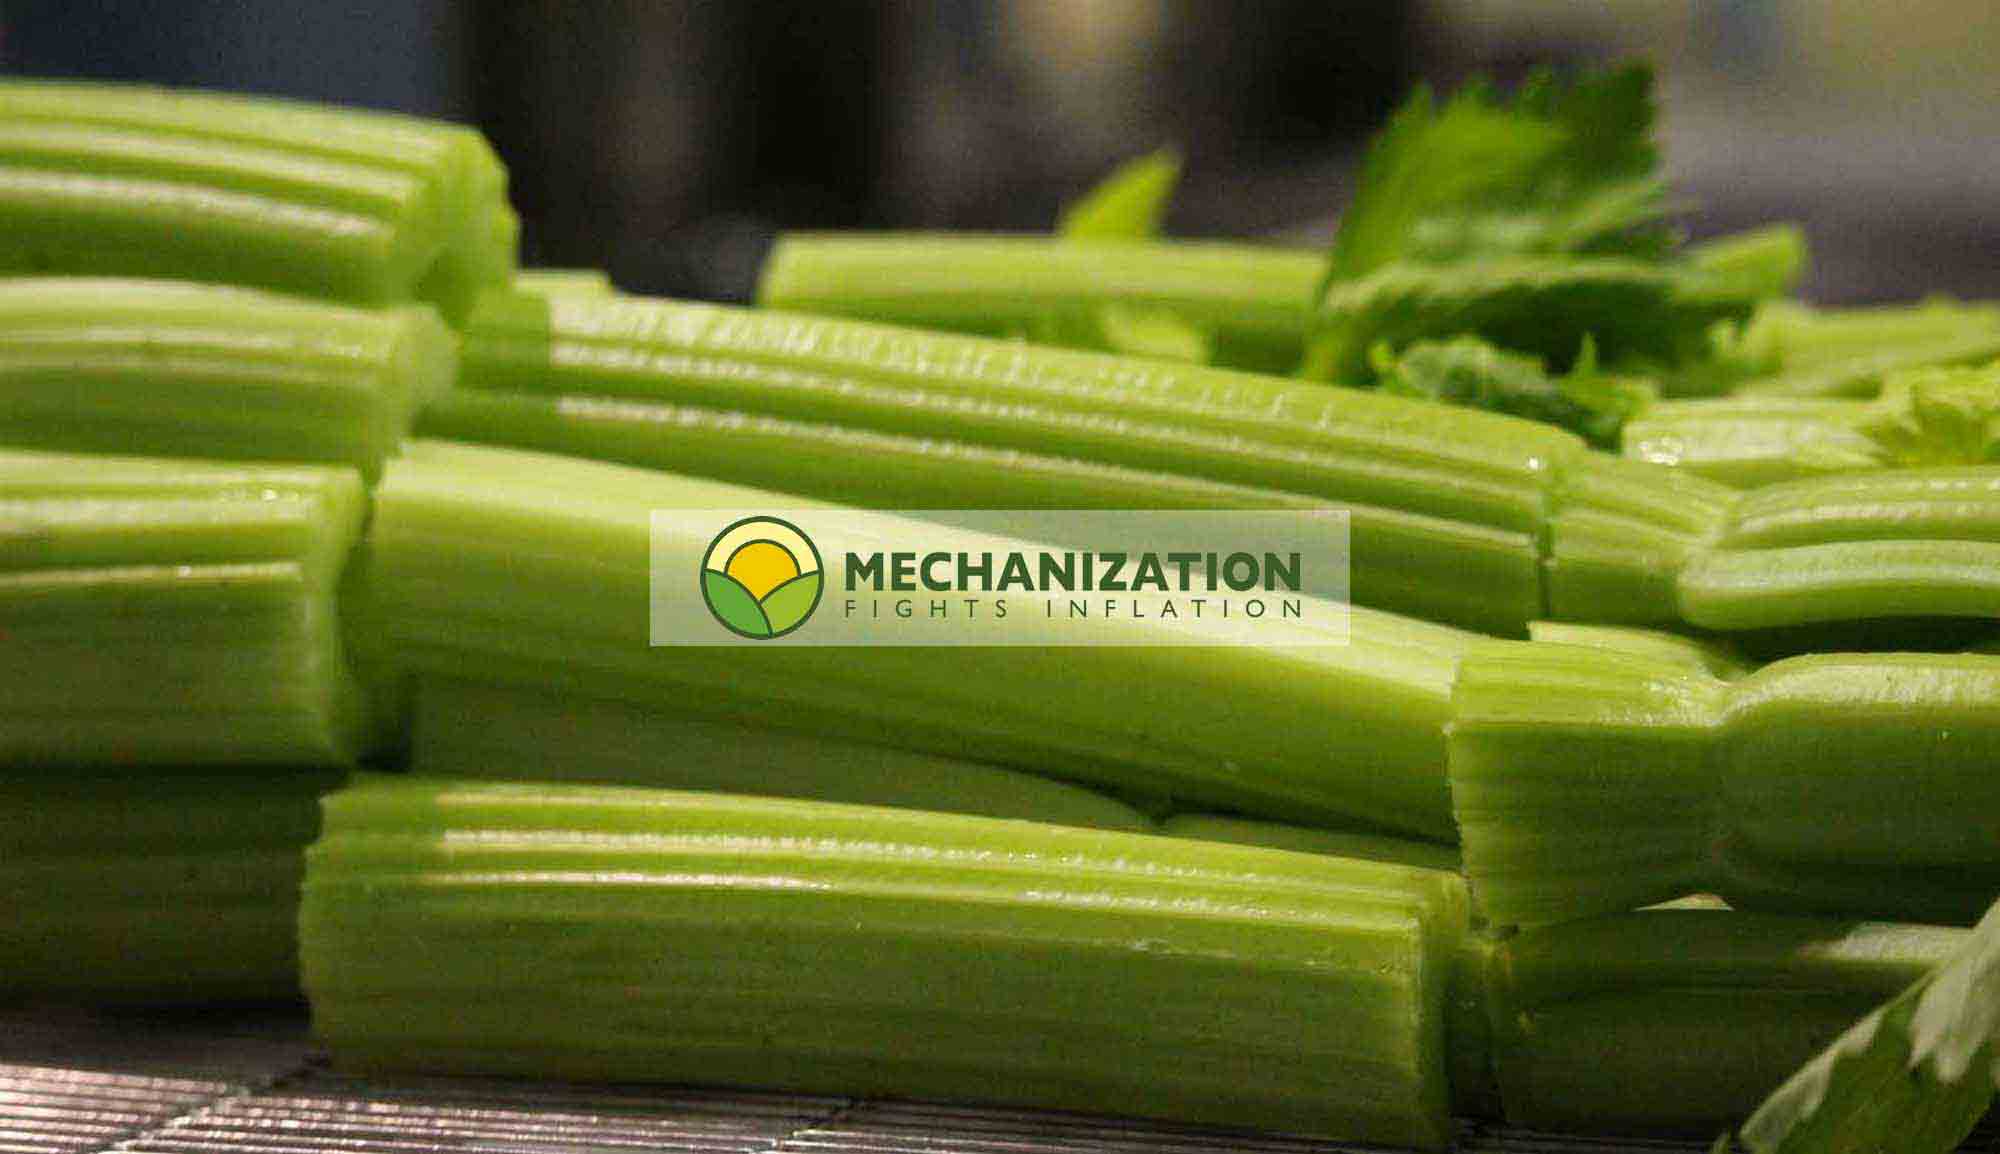 Vegetable slicing and dicing equipment